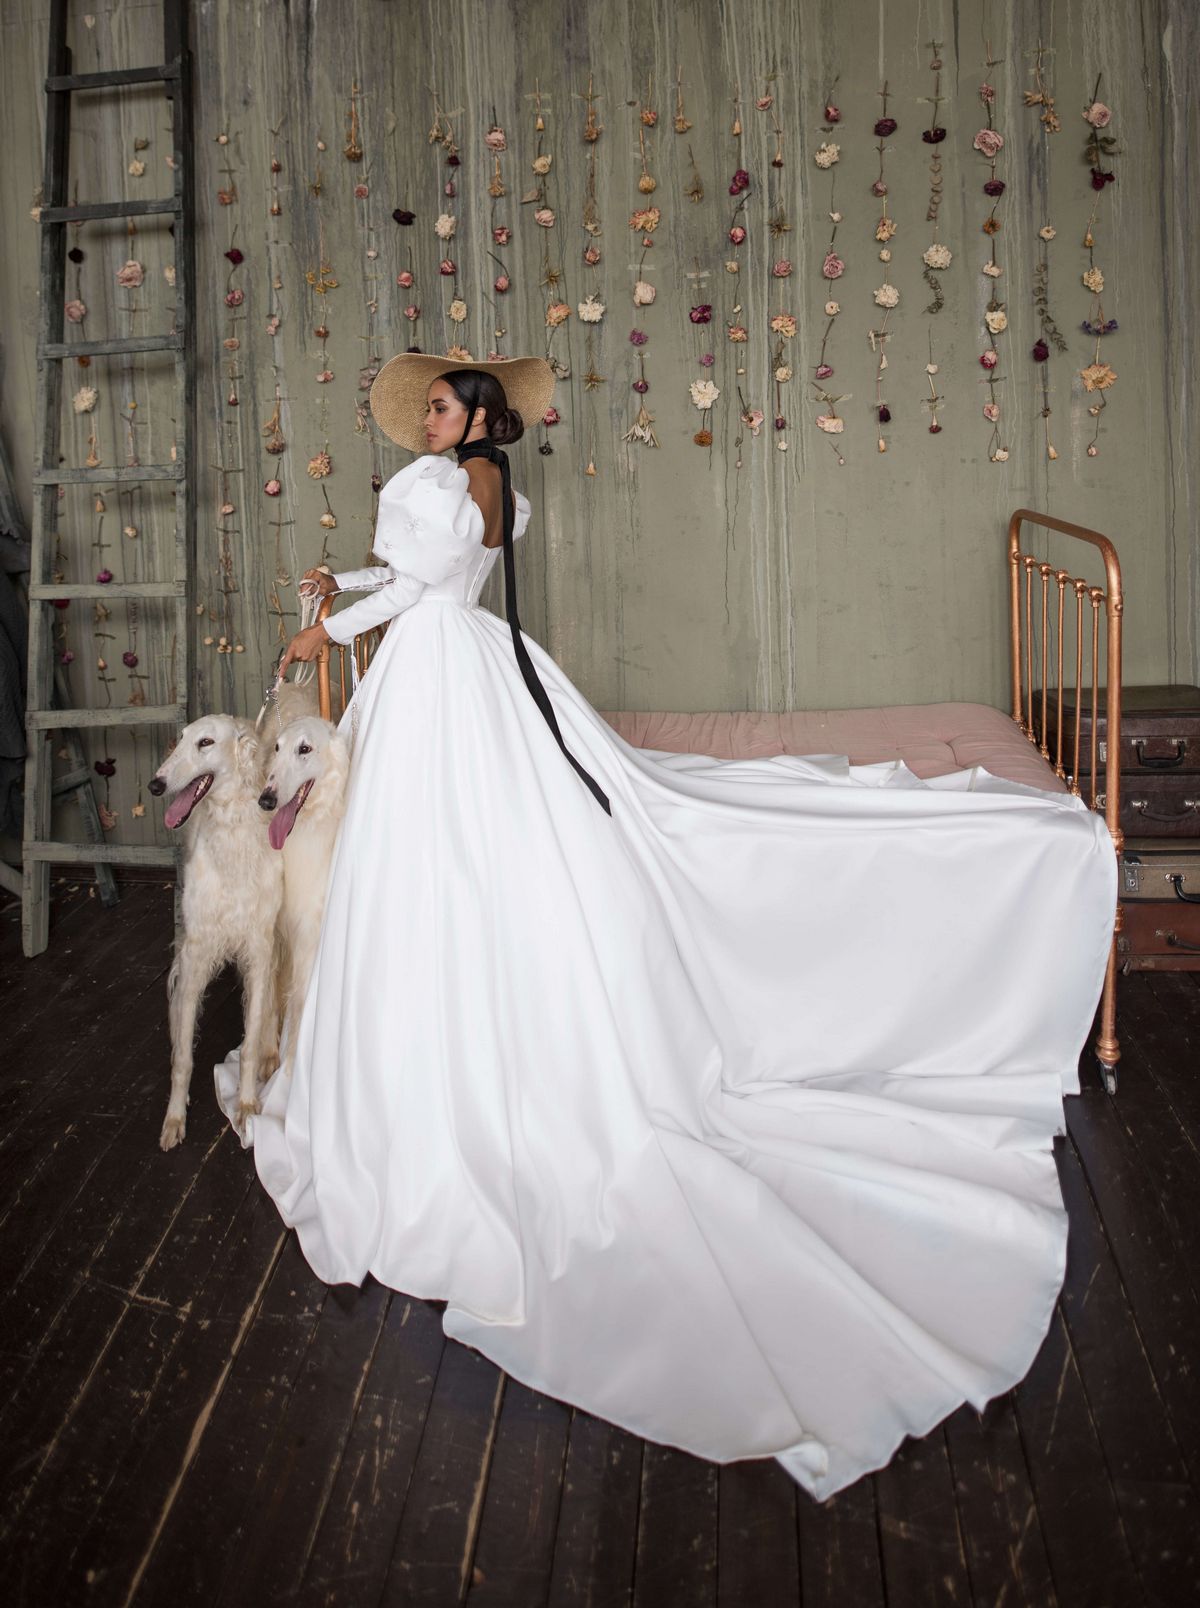 Itan wedding dress by rara avis with white satin fabric and off shoulders long sleeves at Dell'Amore Bridal, Auckland, NZ. 11